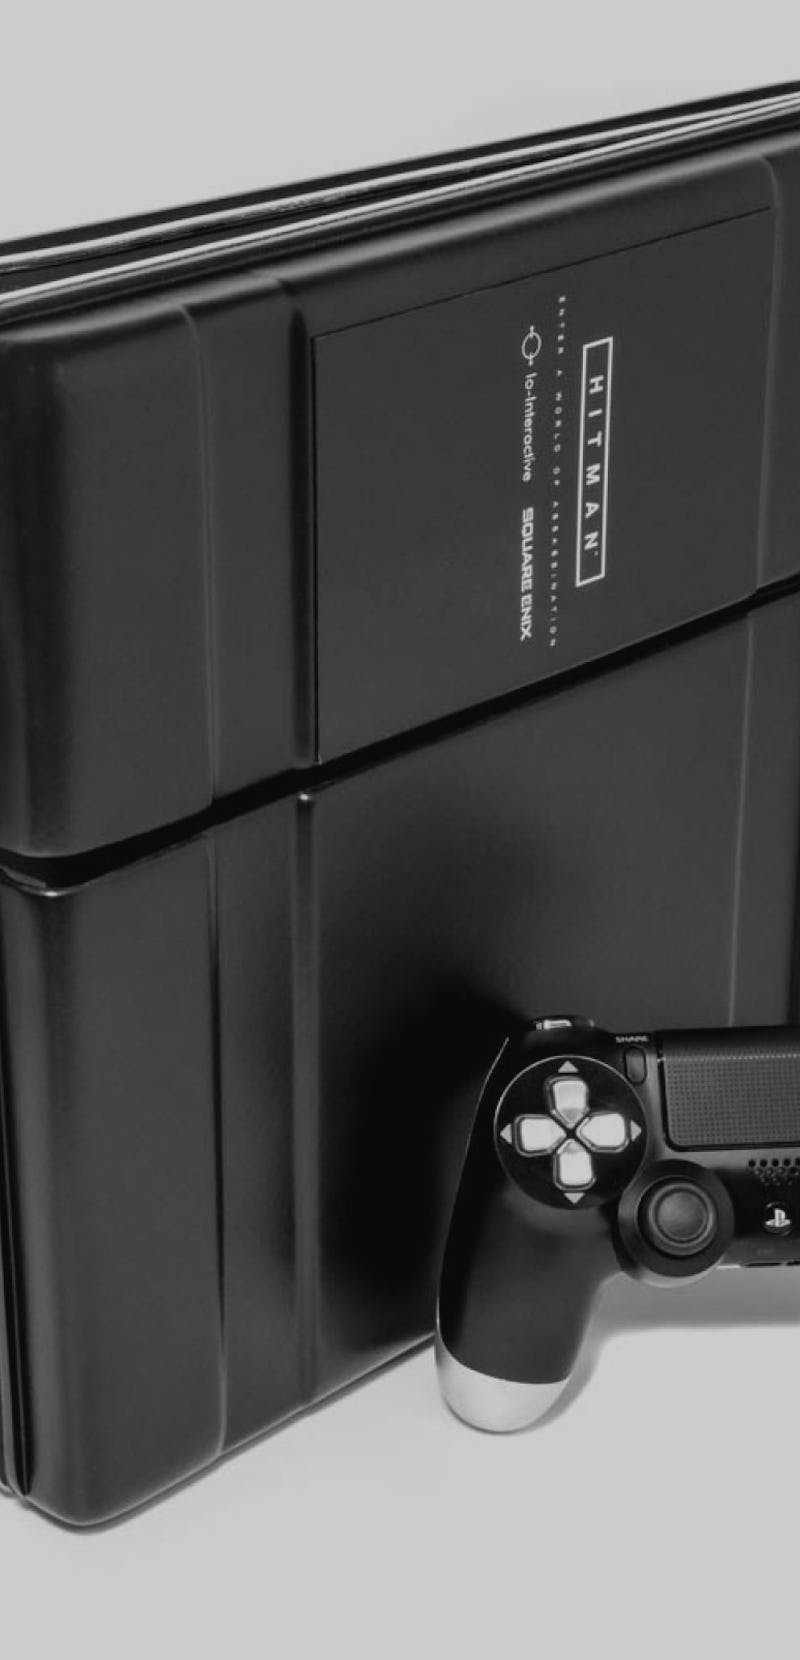 sony playstation 4 hitman console in the shape of briefcase